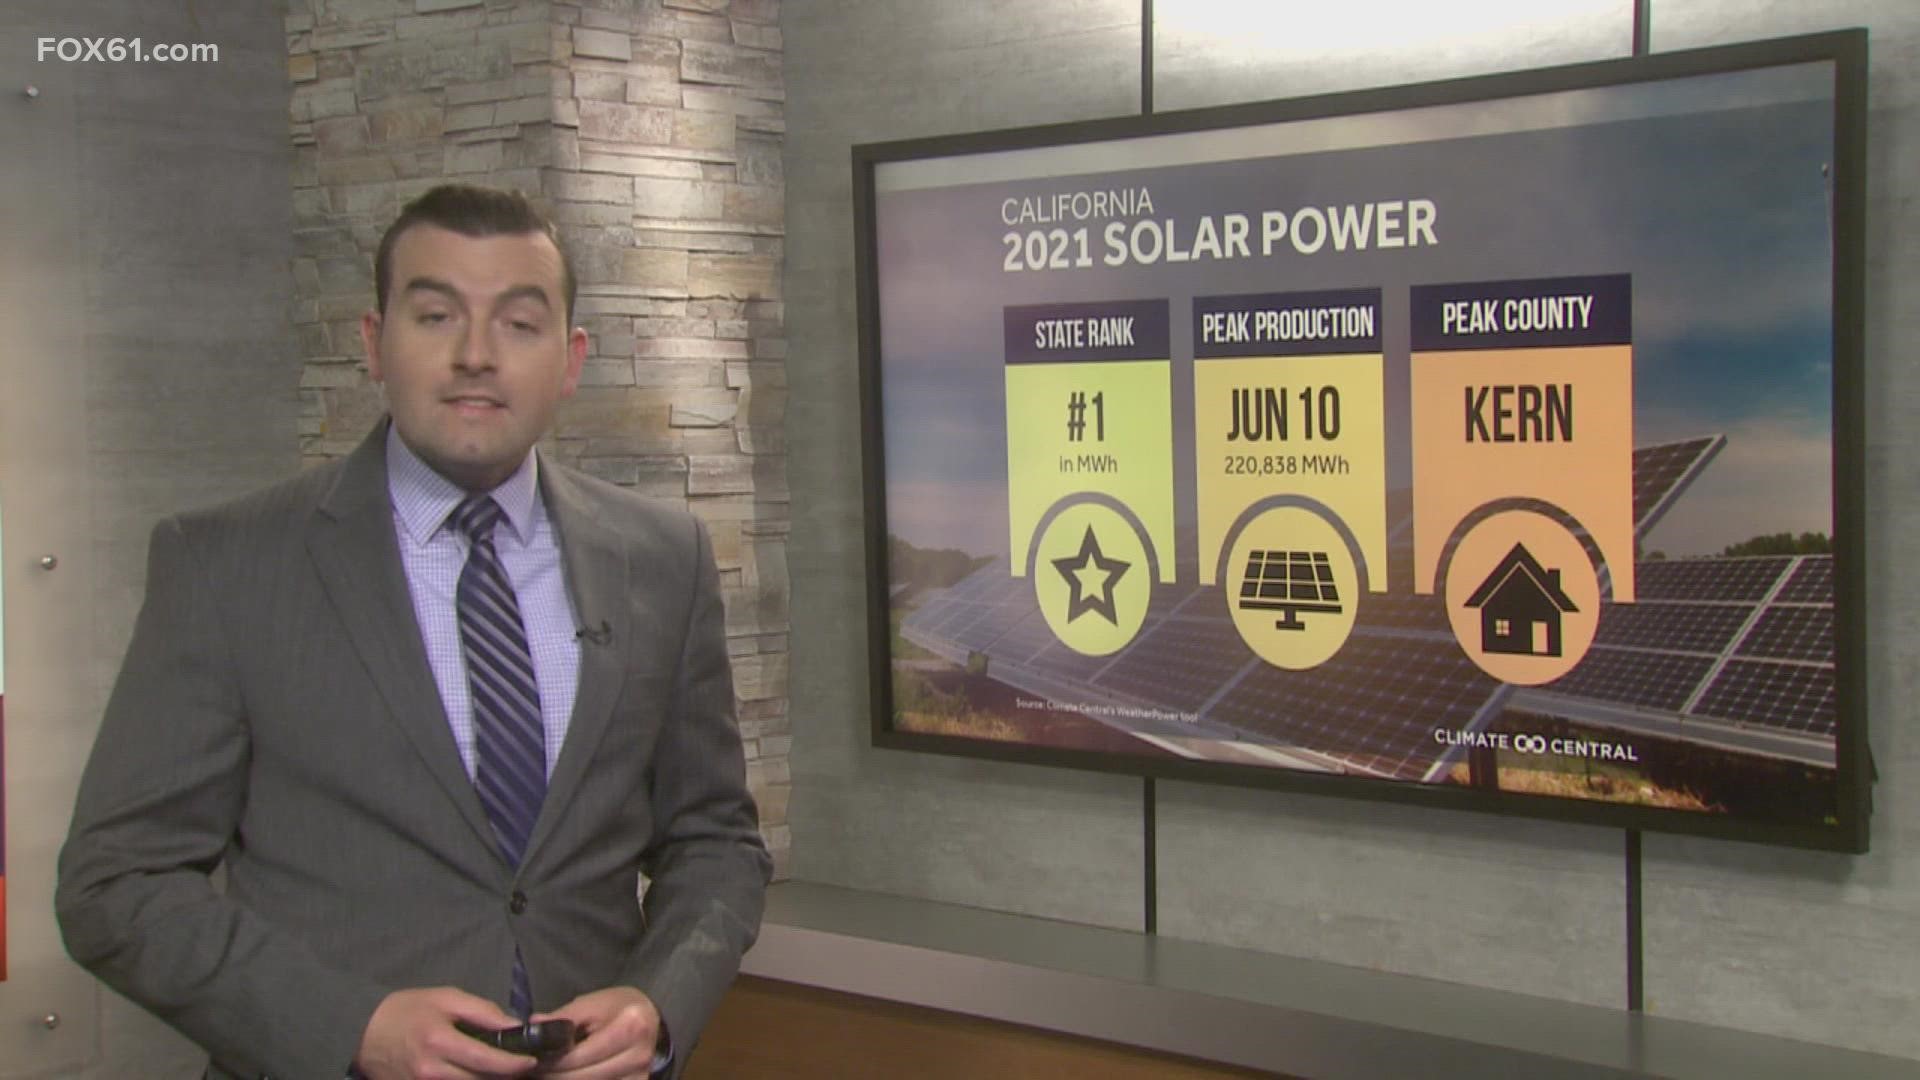 A new report from Climate Central, the WeatherPower Year in Review, analyzes where the most wind and solar energy was produced in the U.S. in 2021.